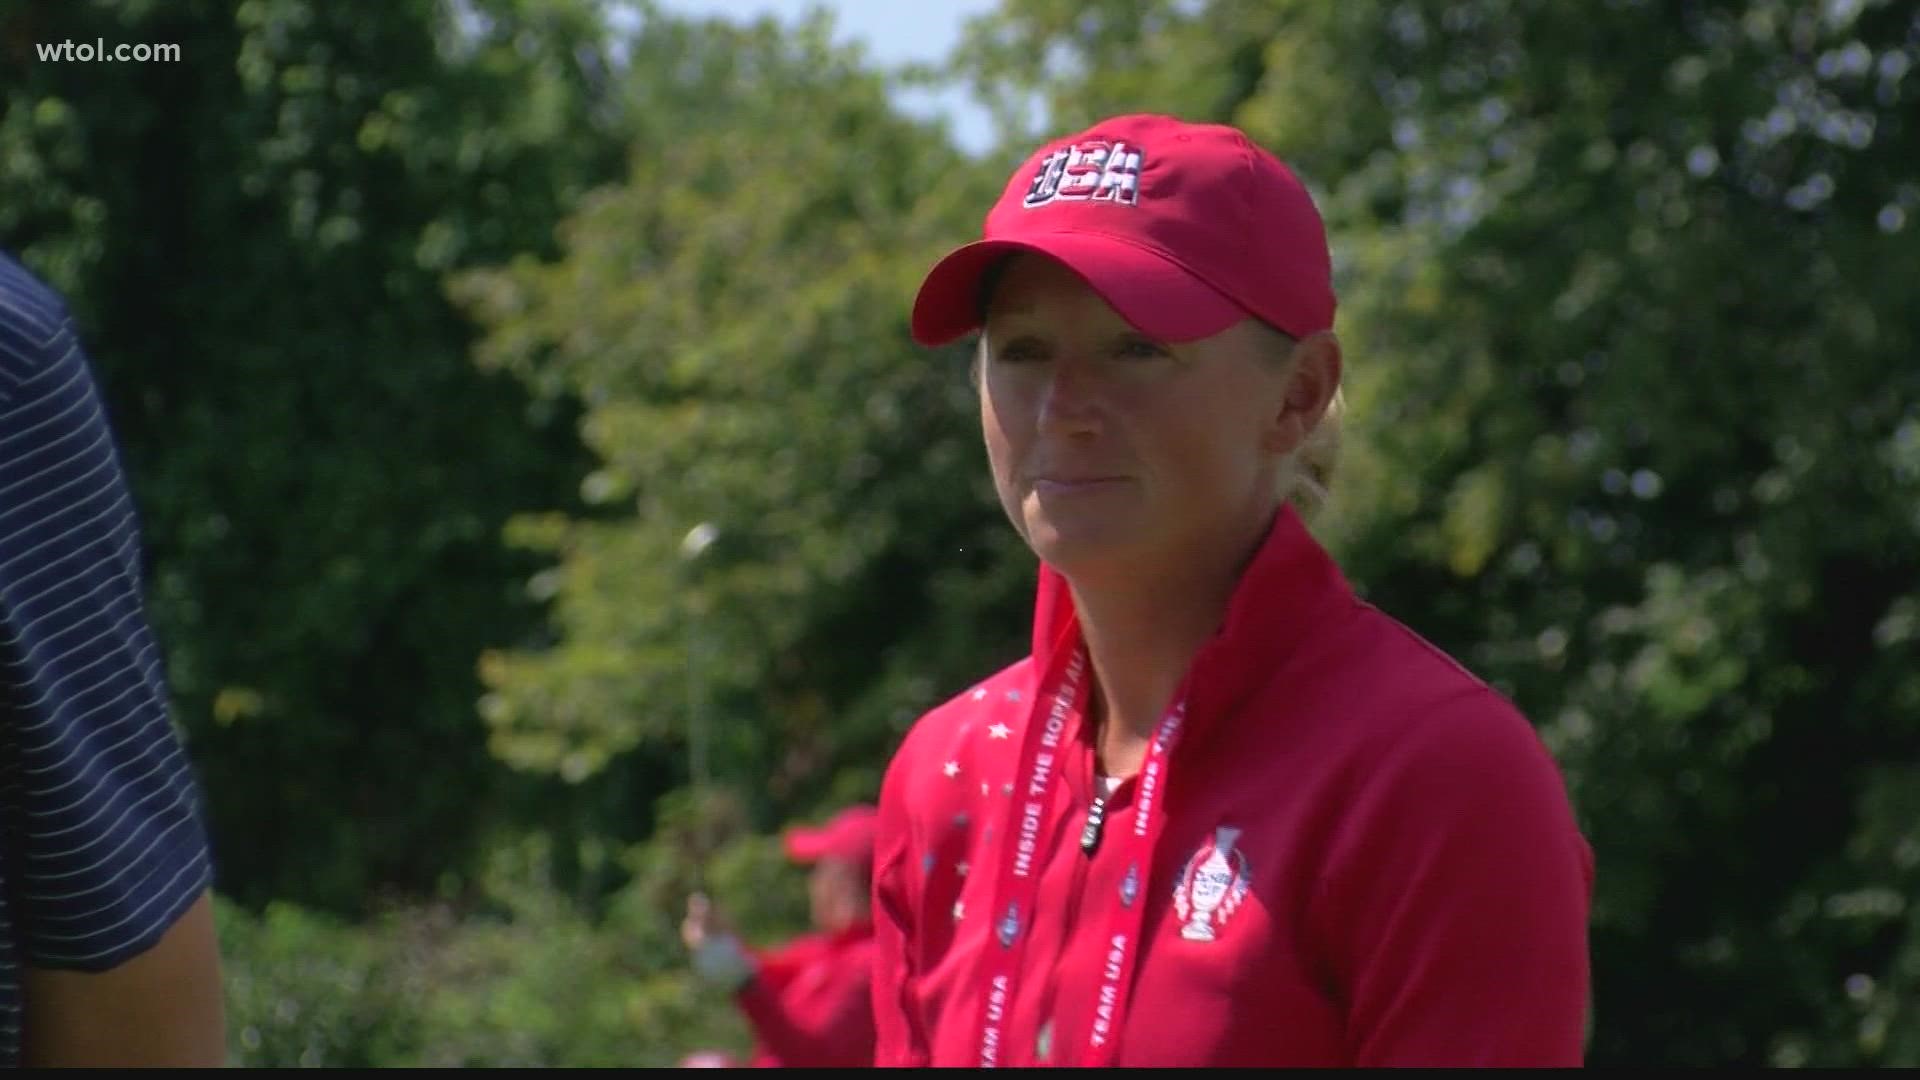 Lewis, a fan favorite, played a huge role in getting the Solheim Cup to Toledo, but will not be playing in the tournament.